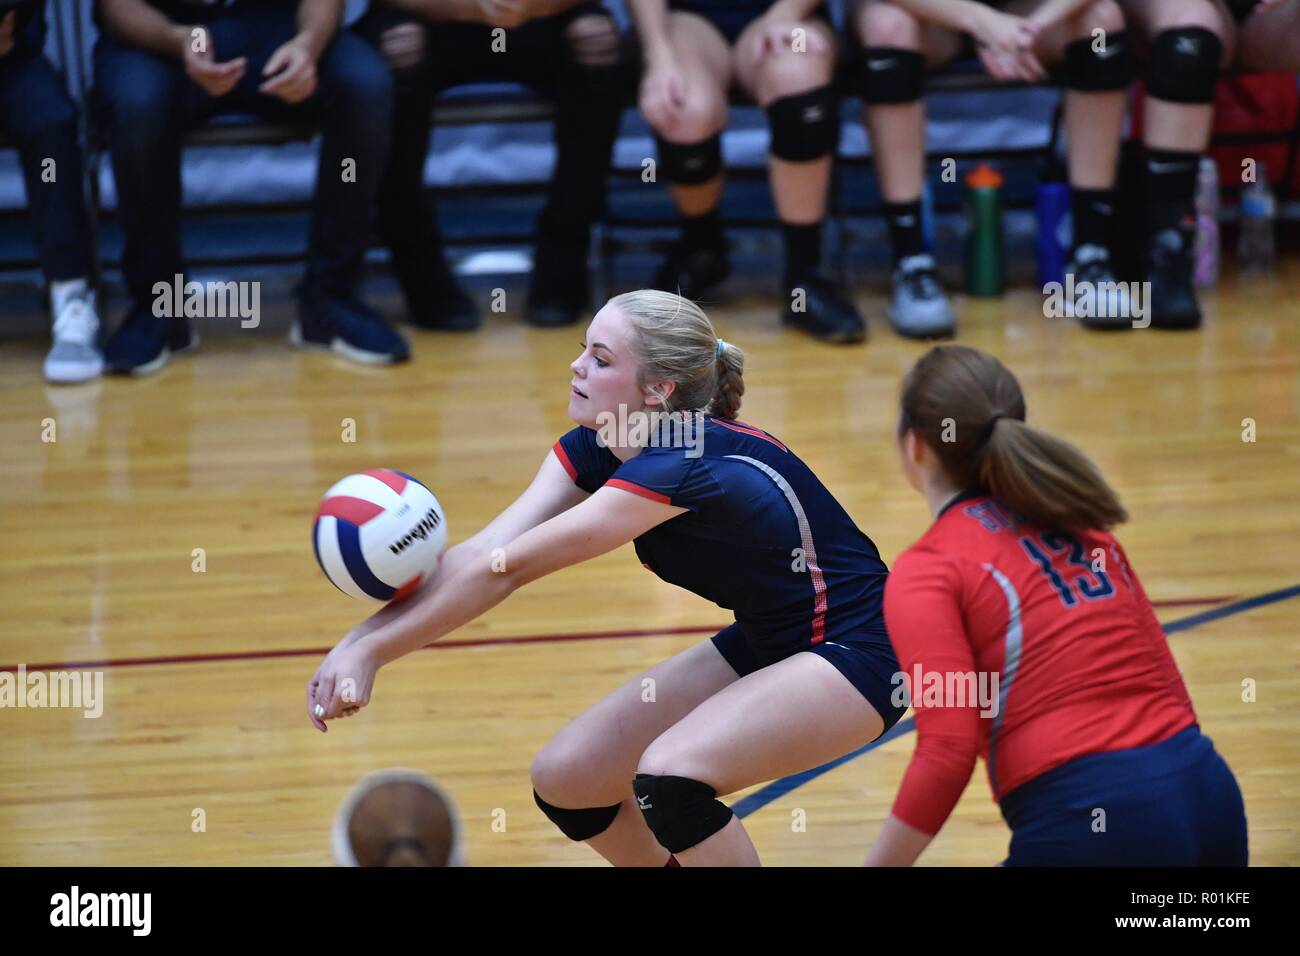 Player accepting and returning an opposing serve. USA. Stock Photo